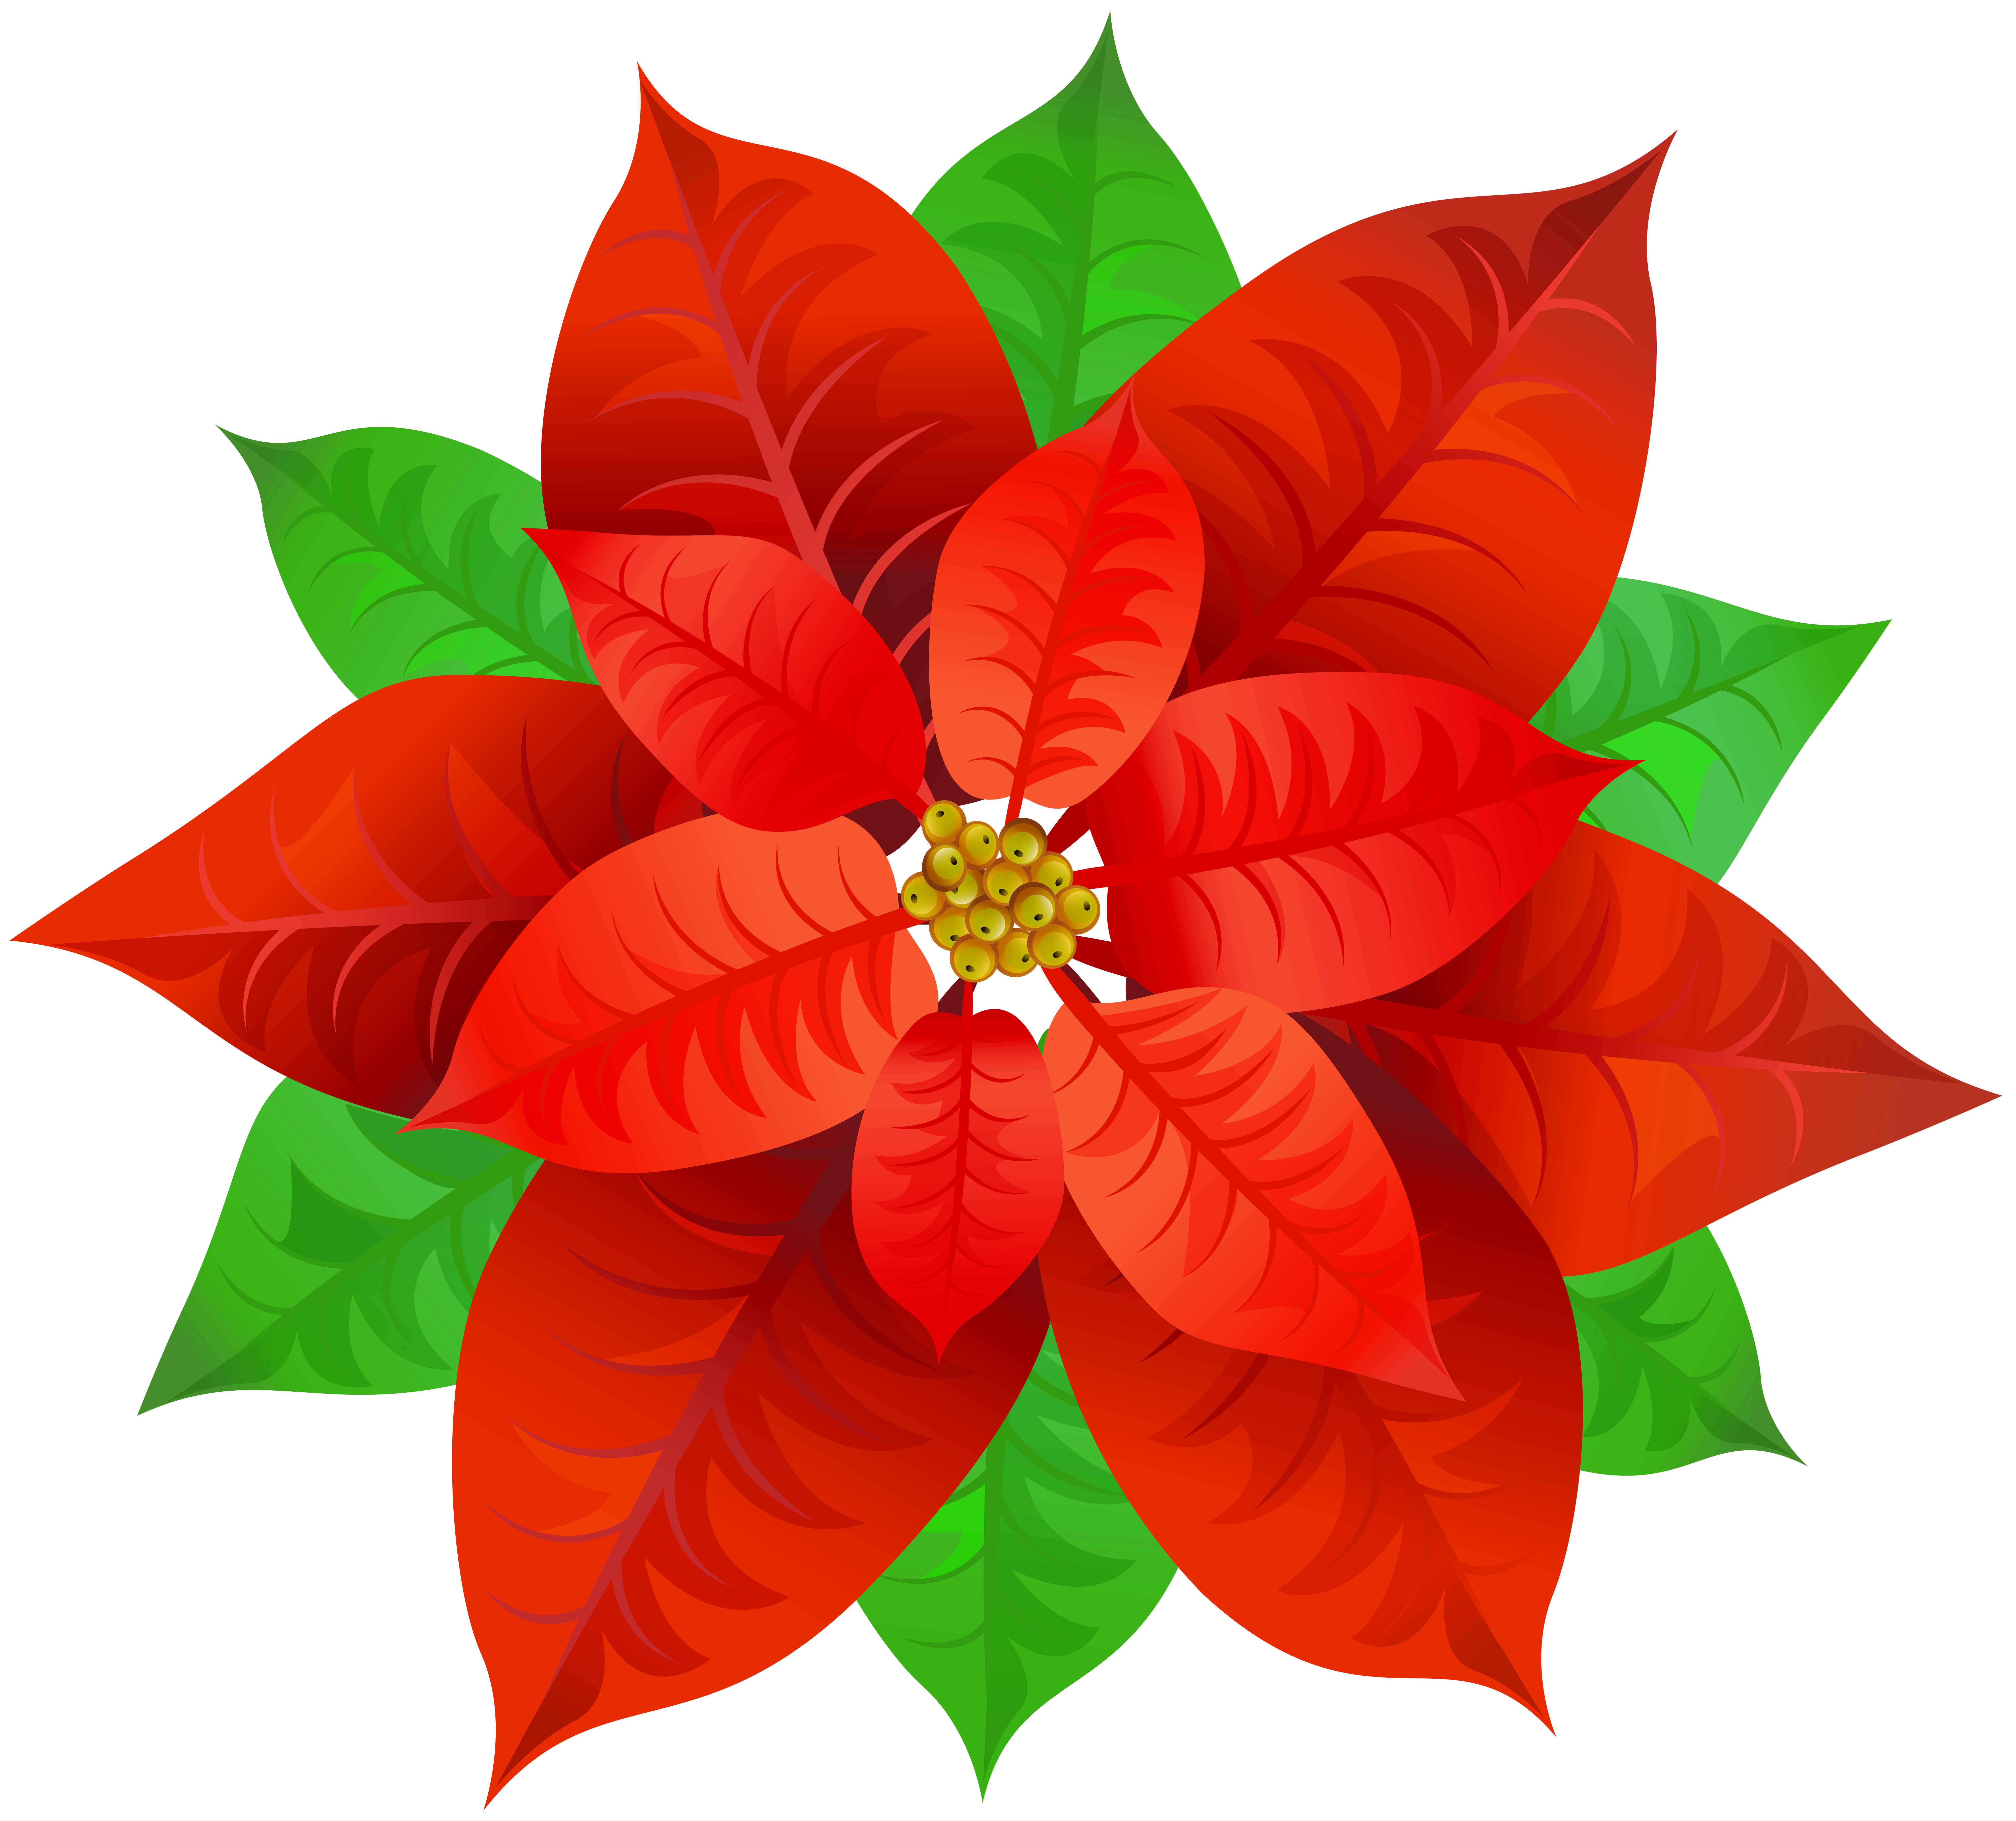 Poinsettia Transparent Background #1547717 (License: Personal Use) .